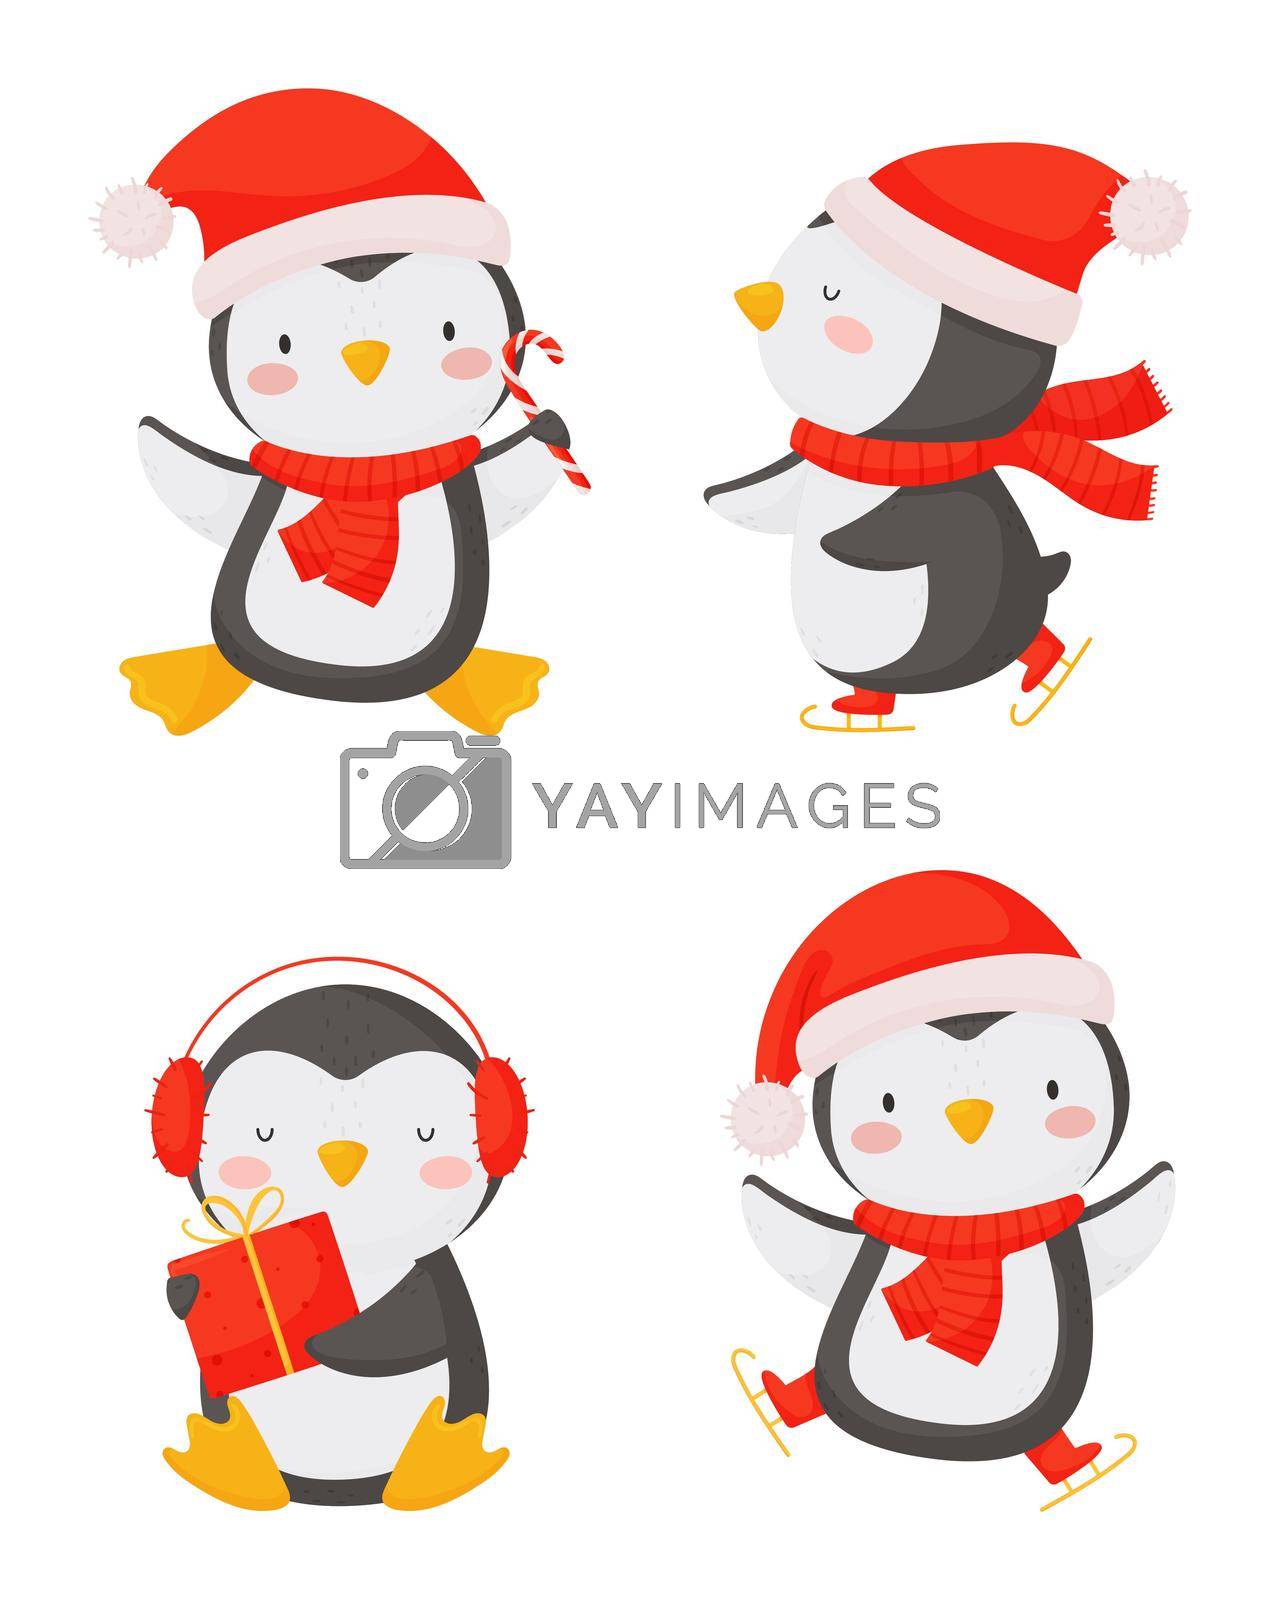 Royalty free image of Christmas set with cute penguins in cartoon style on a white background. by Lena_Khmelniuk